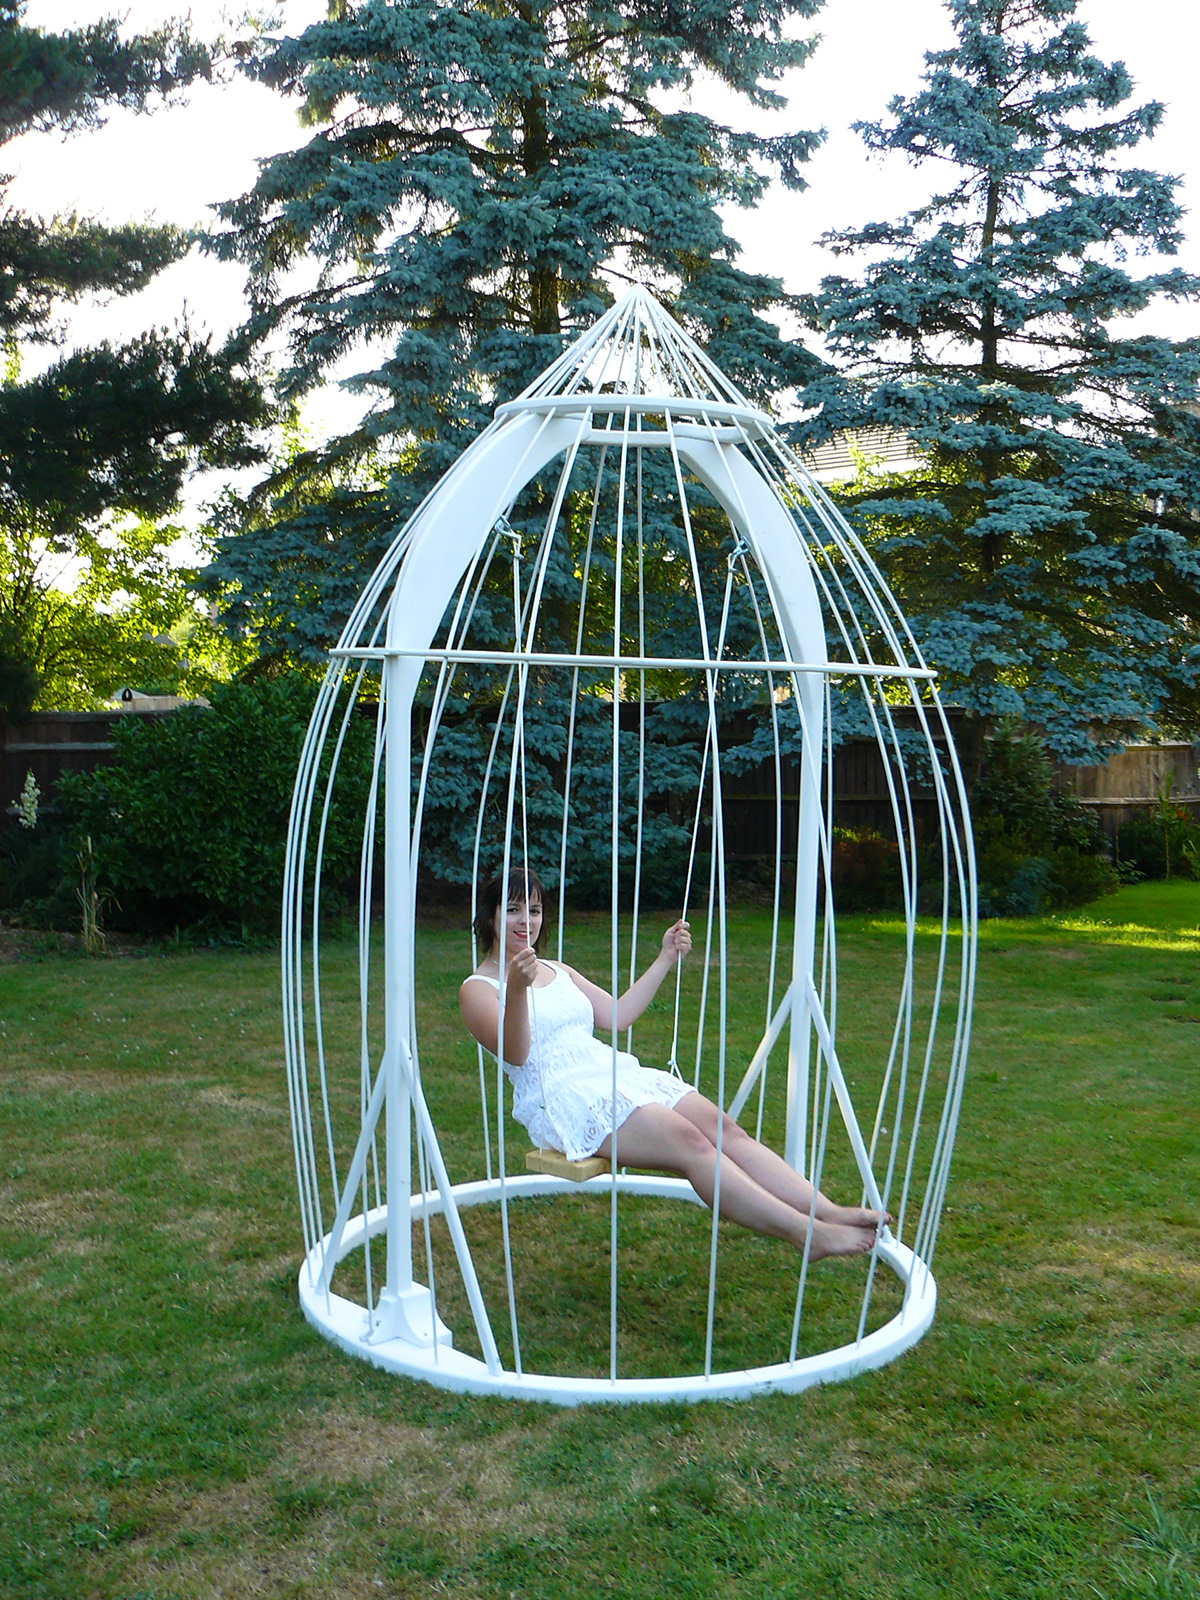 Prop making  snow white  photoshoot  Magazine   coffin  set design  forest wood  perspex  transparent birdcage swing cage White props